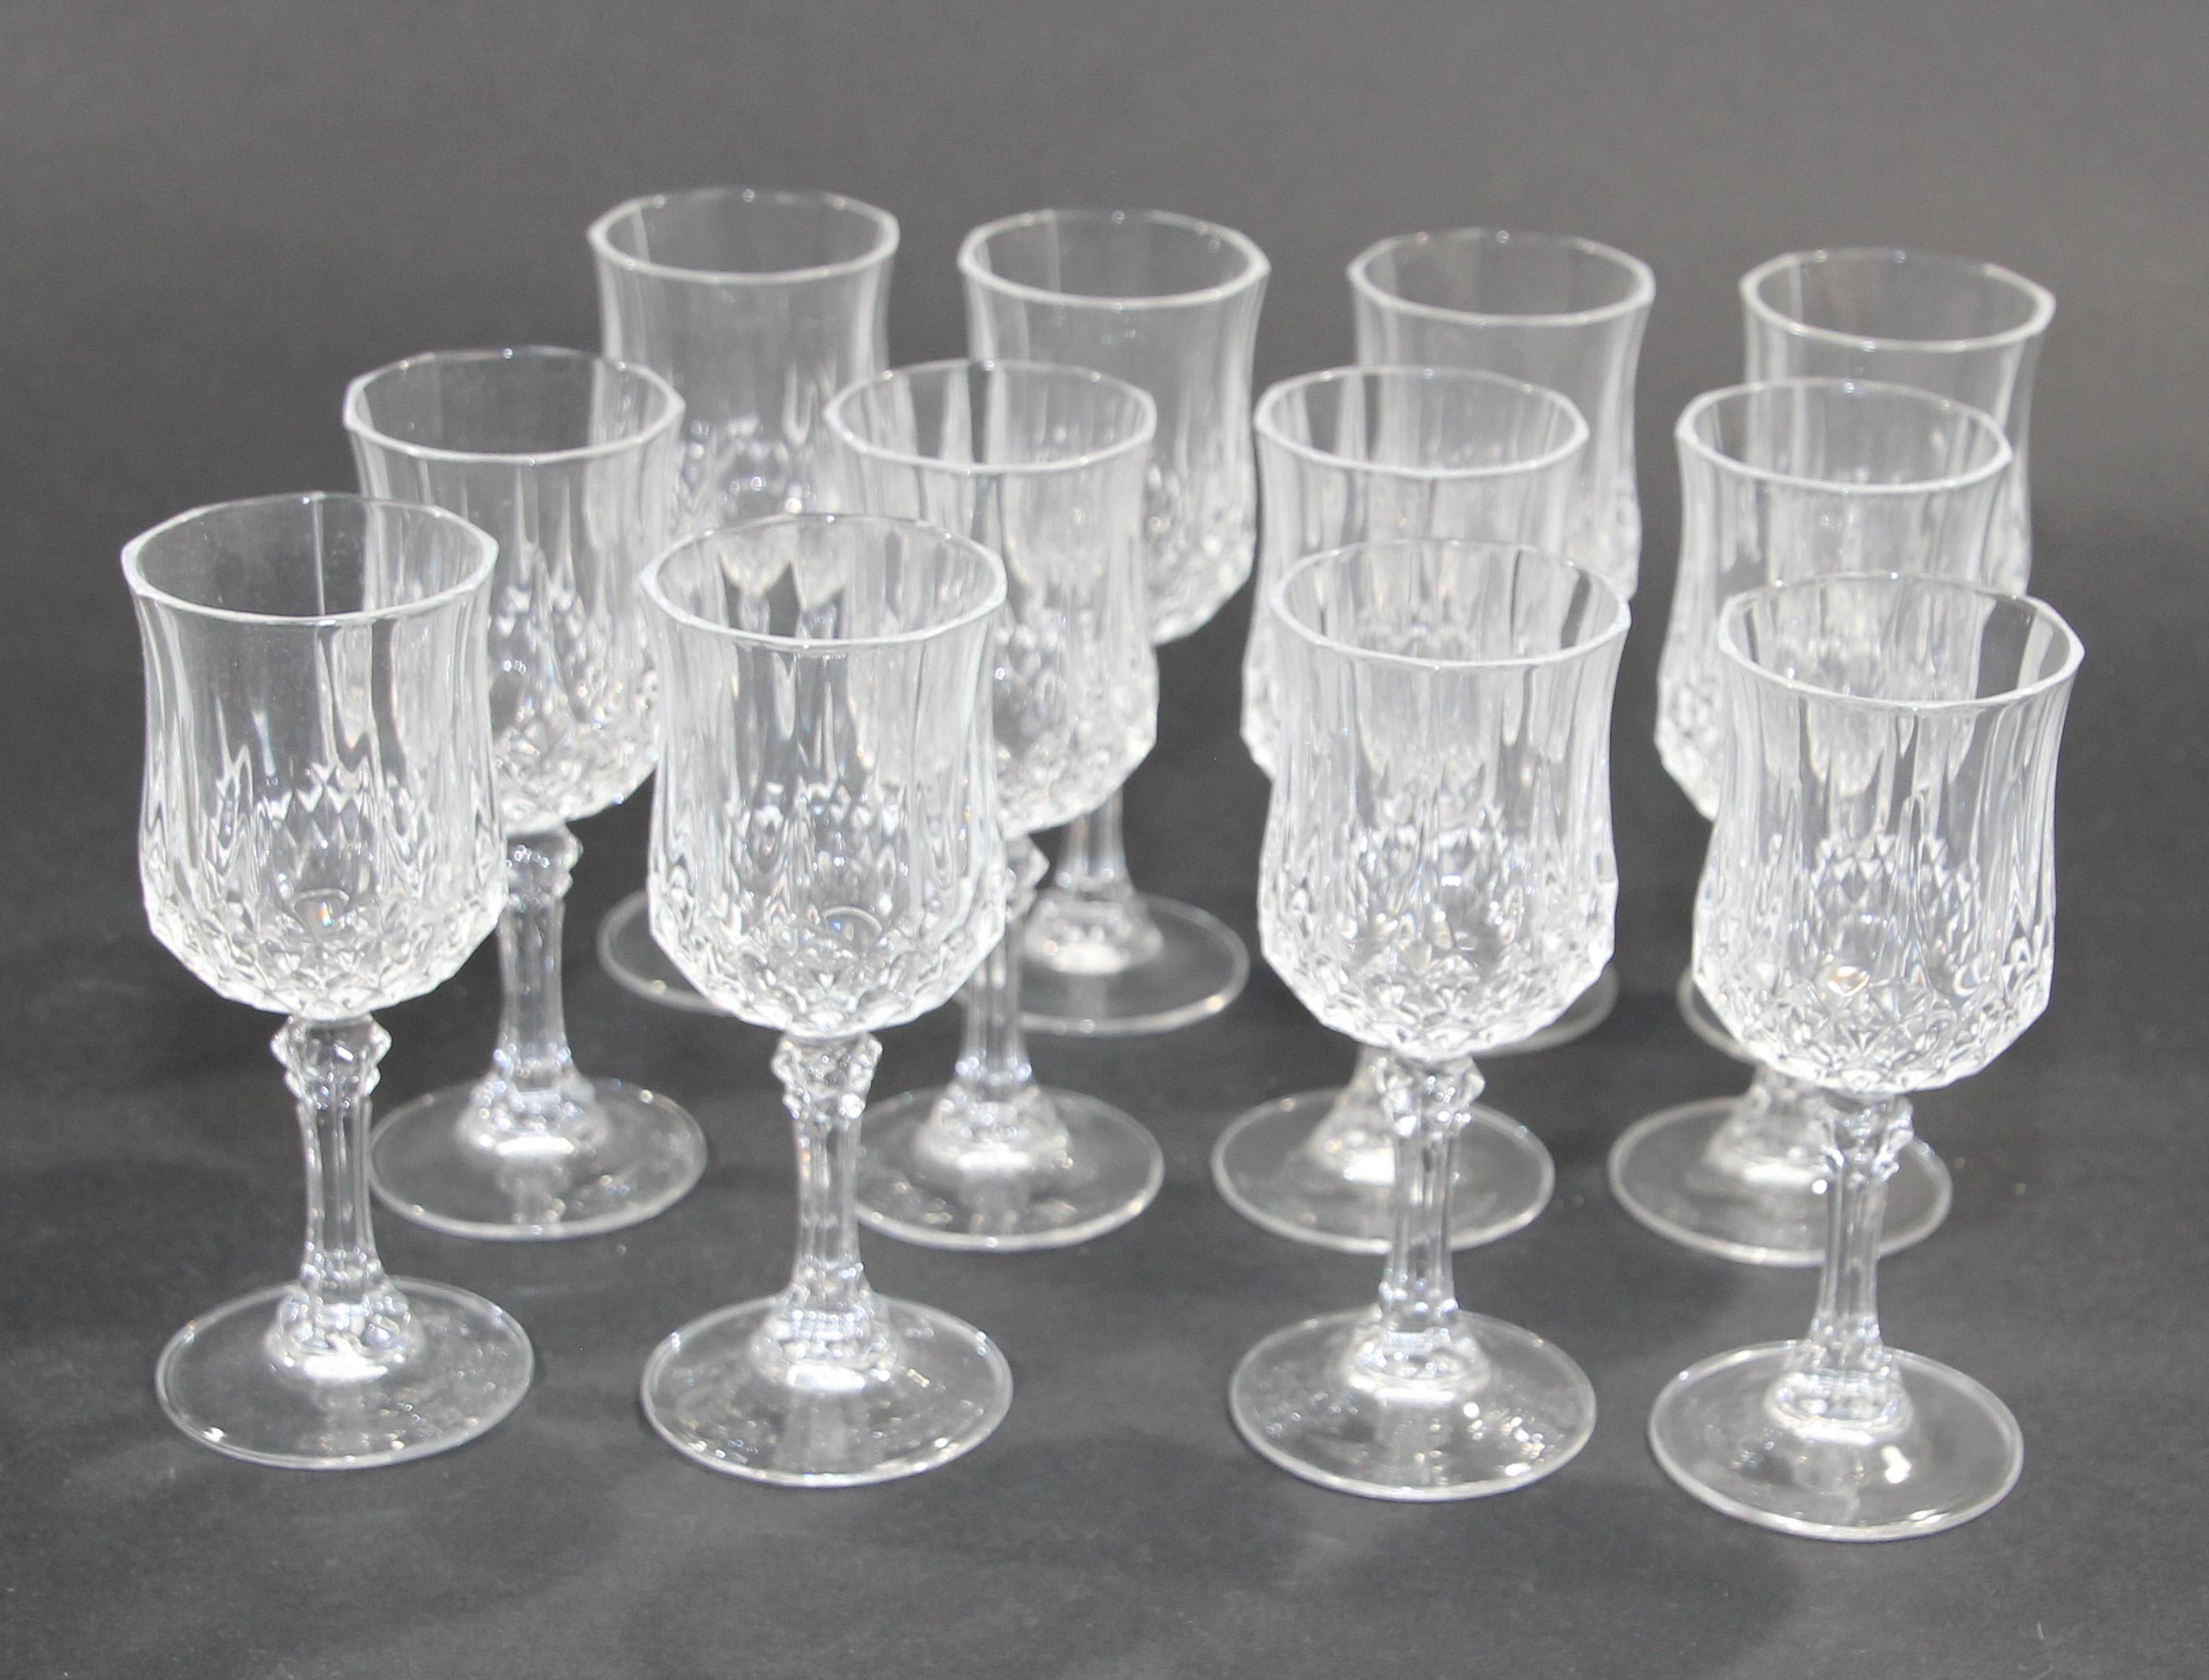 Victorian Crystal D' Arques Longchamp Footed Drinking Glasses, set of 12